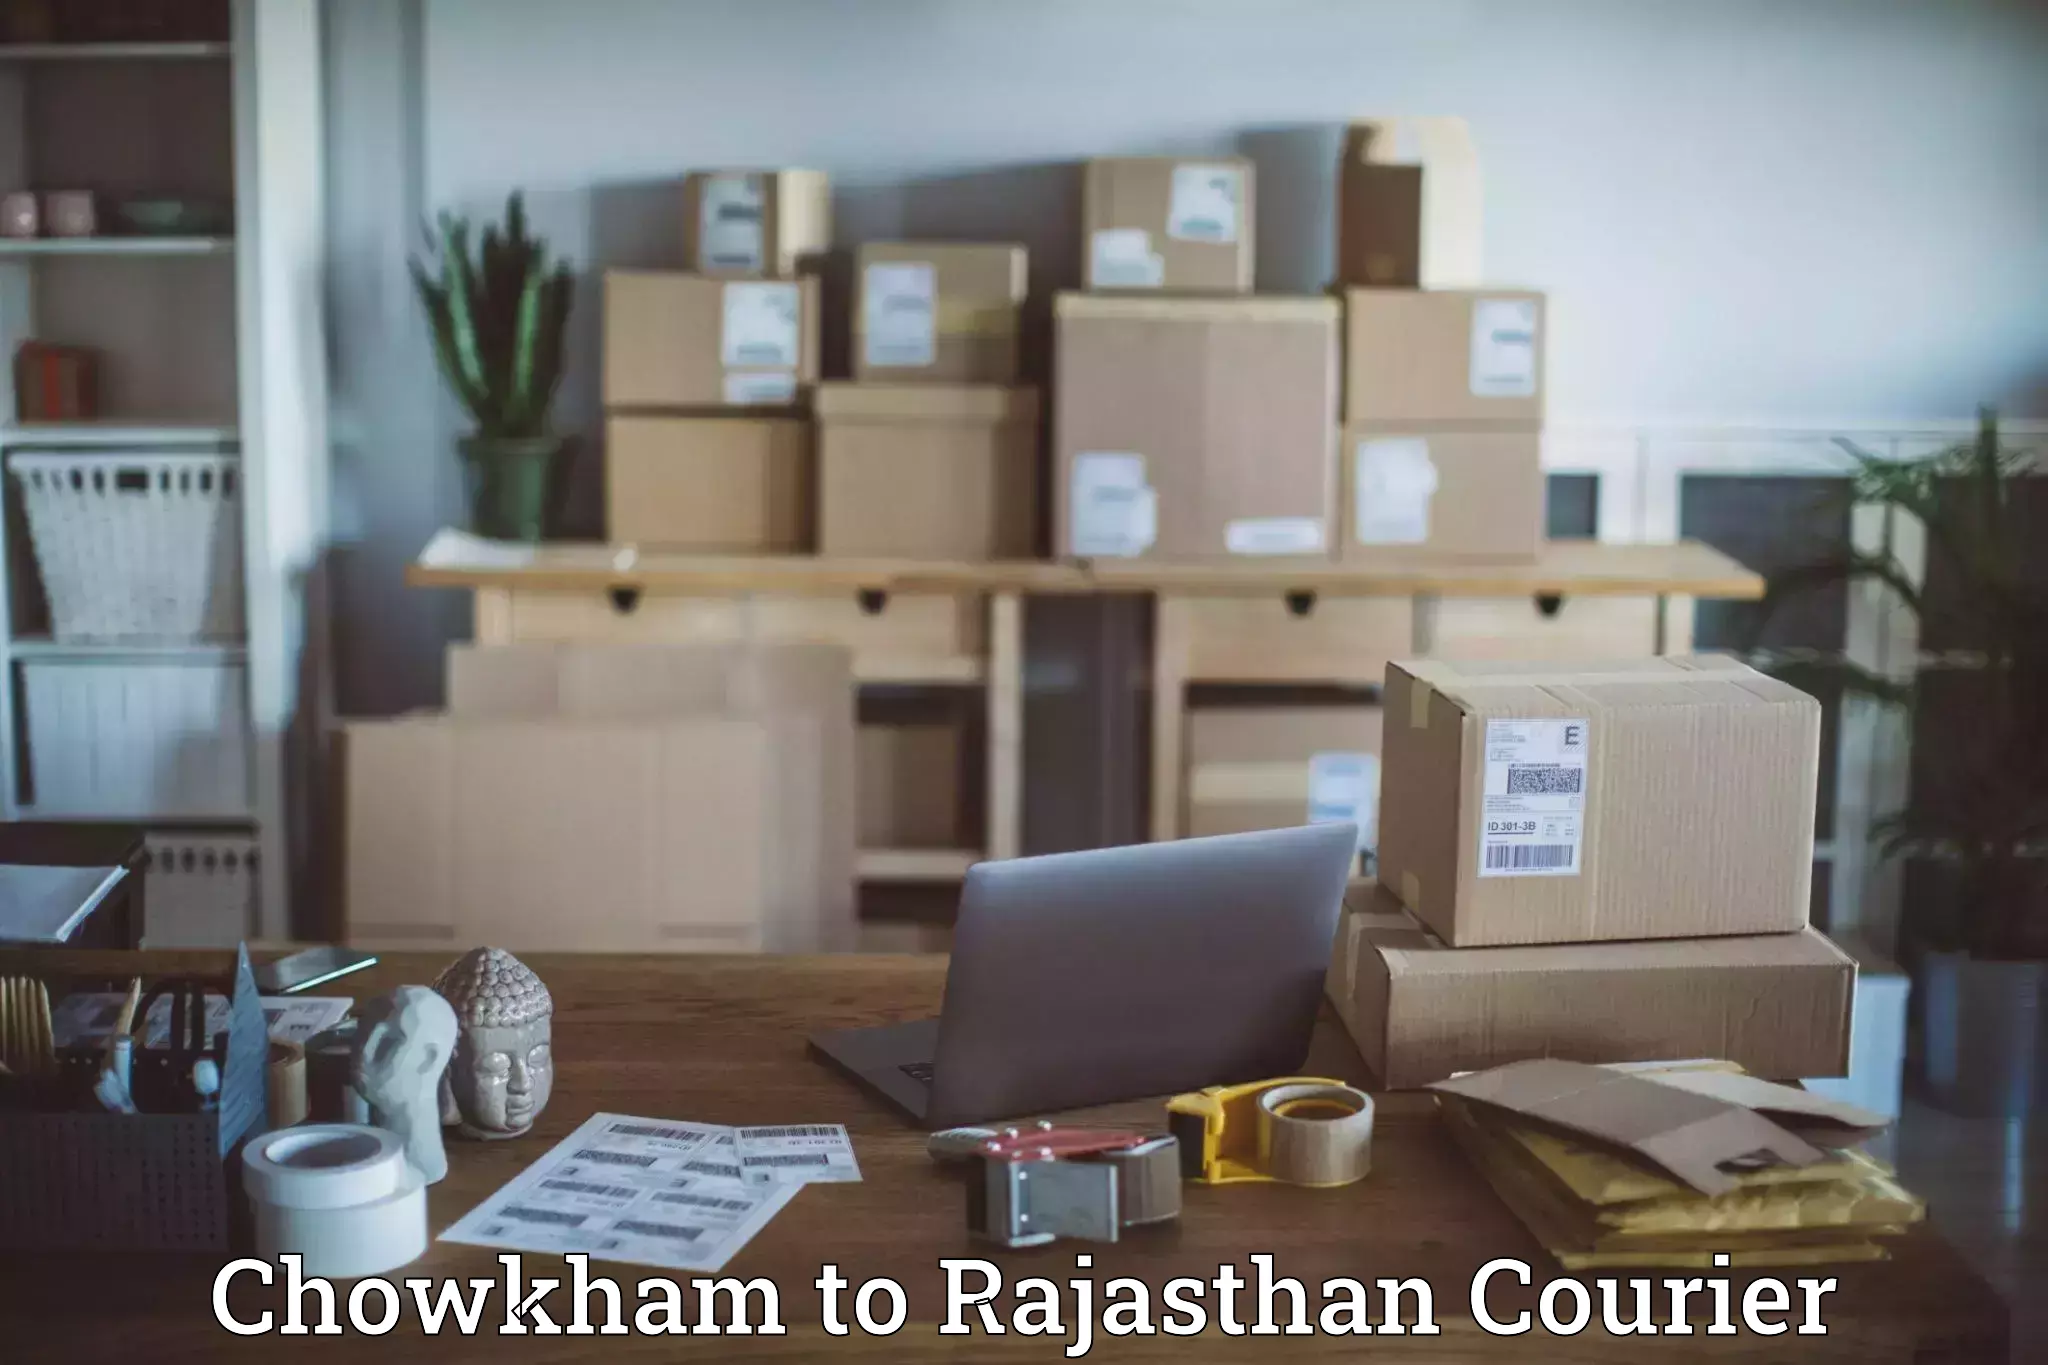 Courier service innovation Chowkham to Mathania